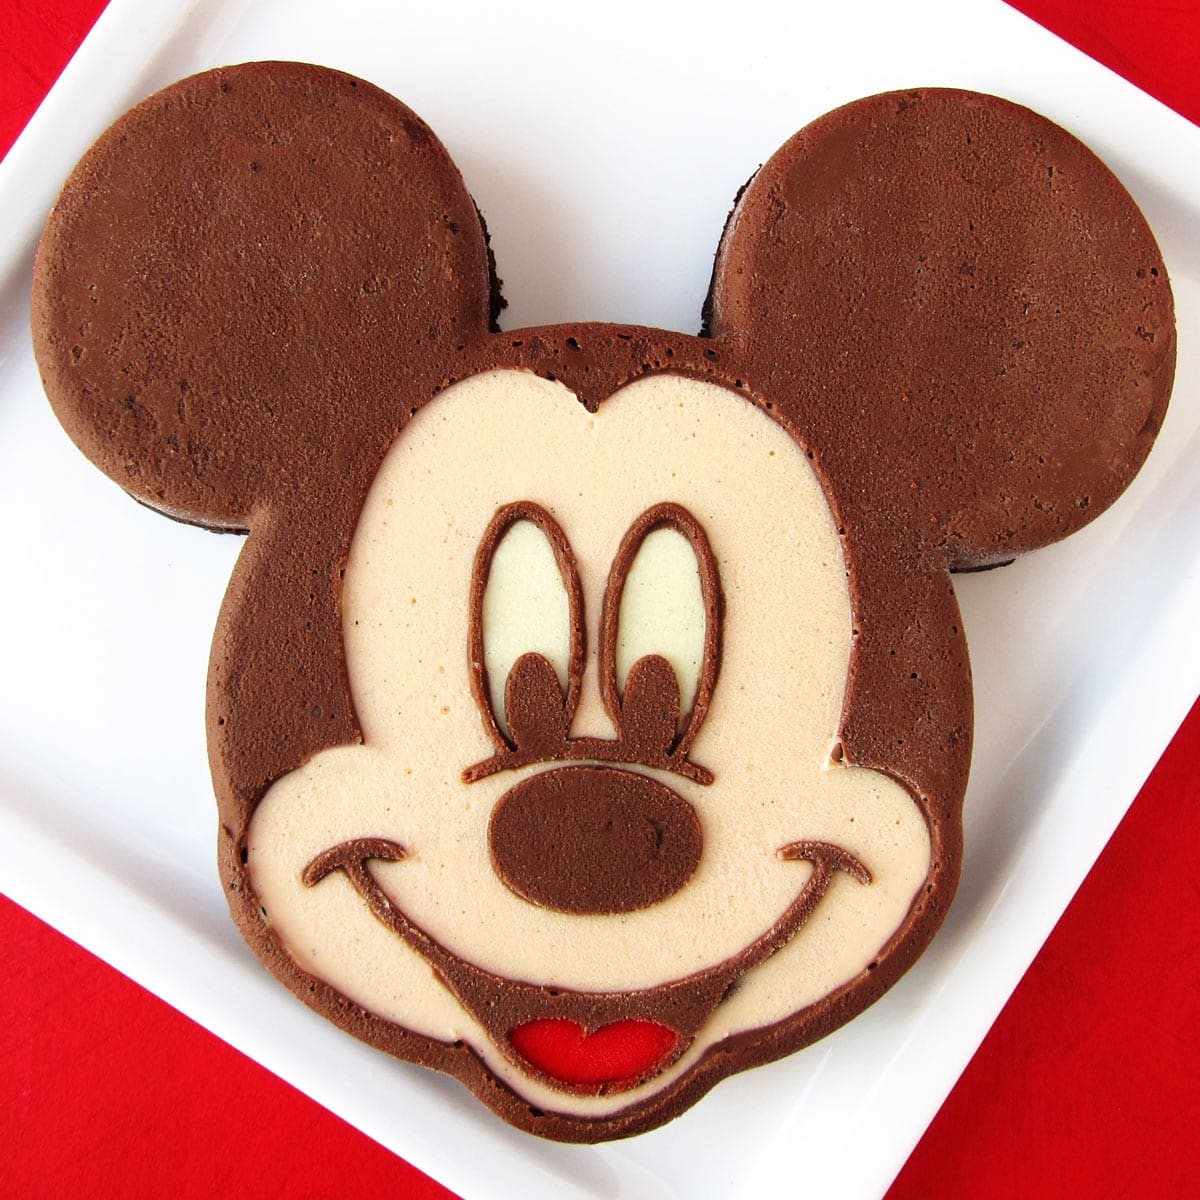 Mickey Mouse Cheesecake